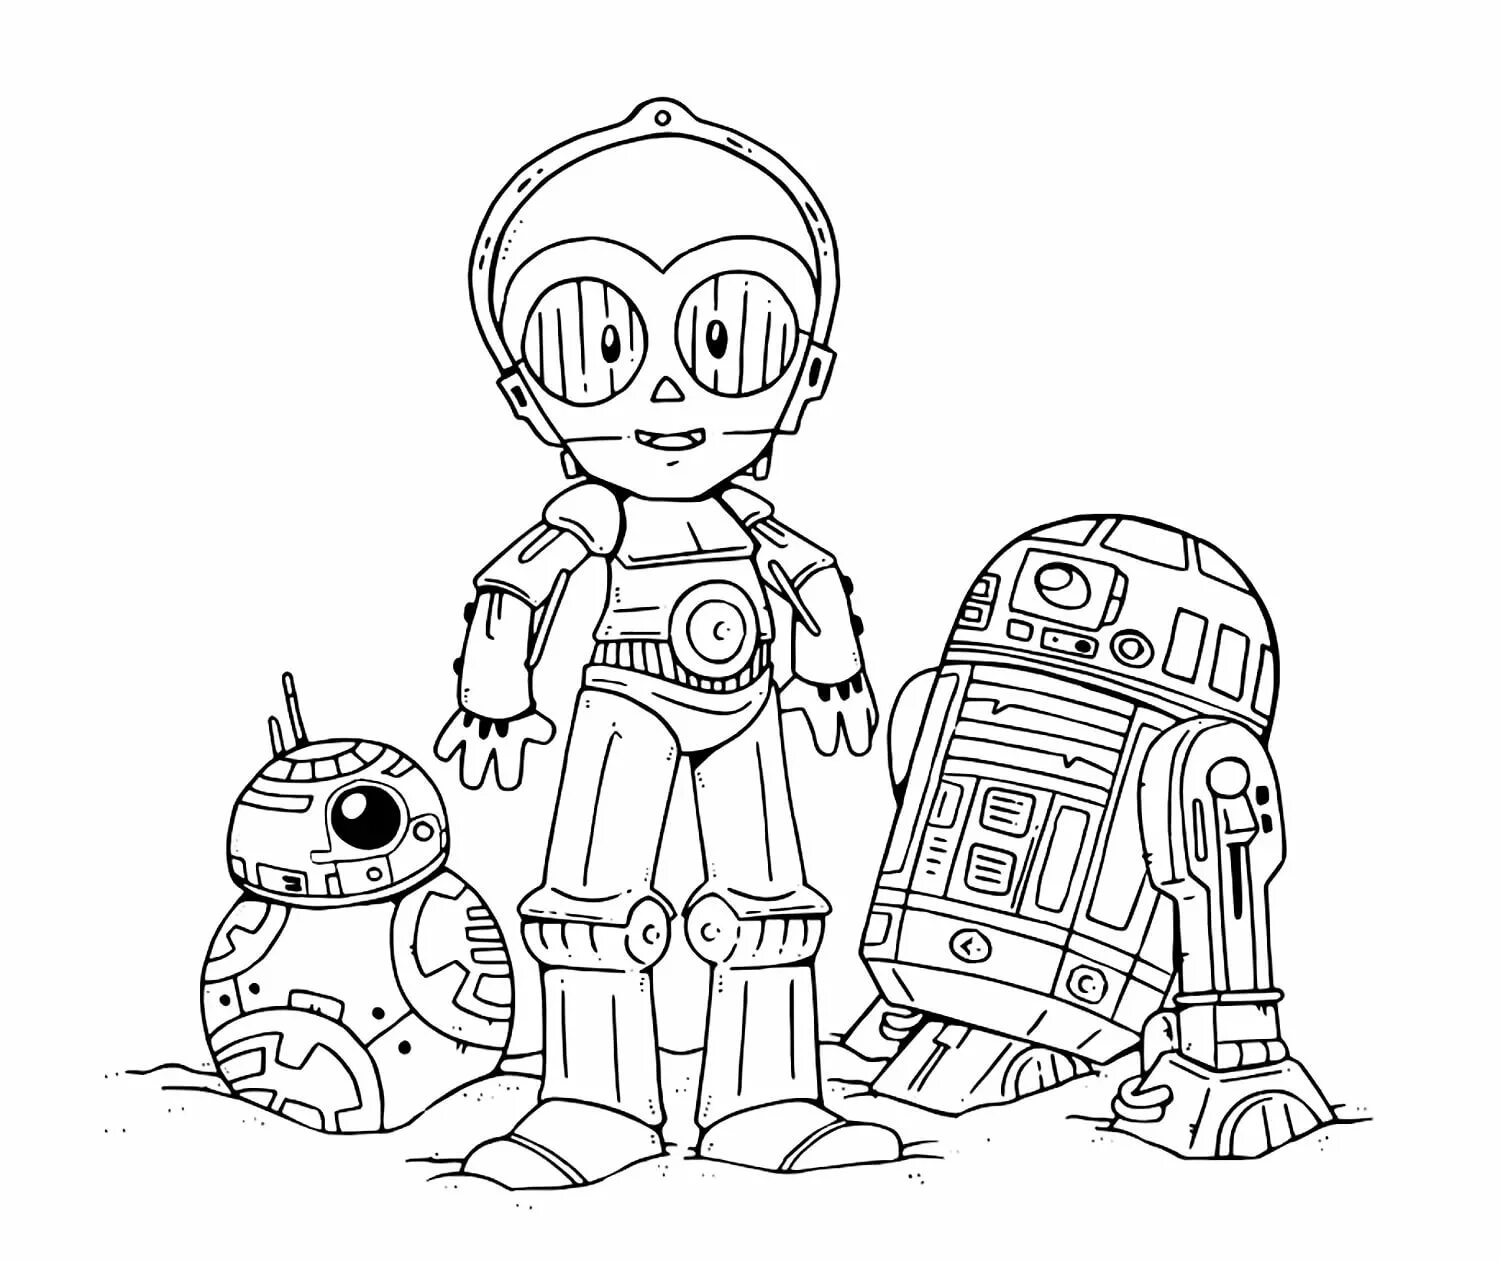 Funny star wars coloring pages for kids